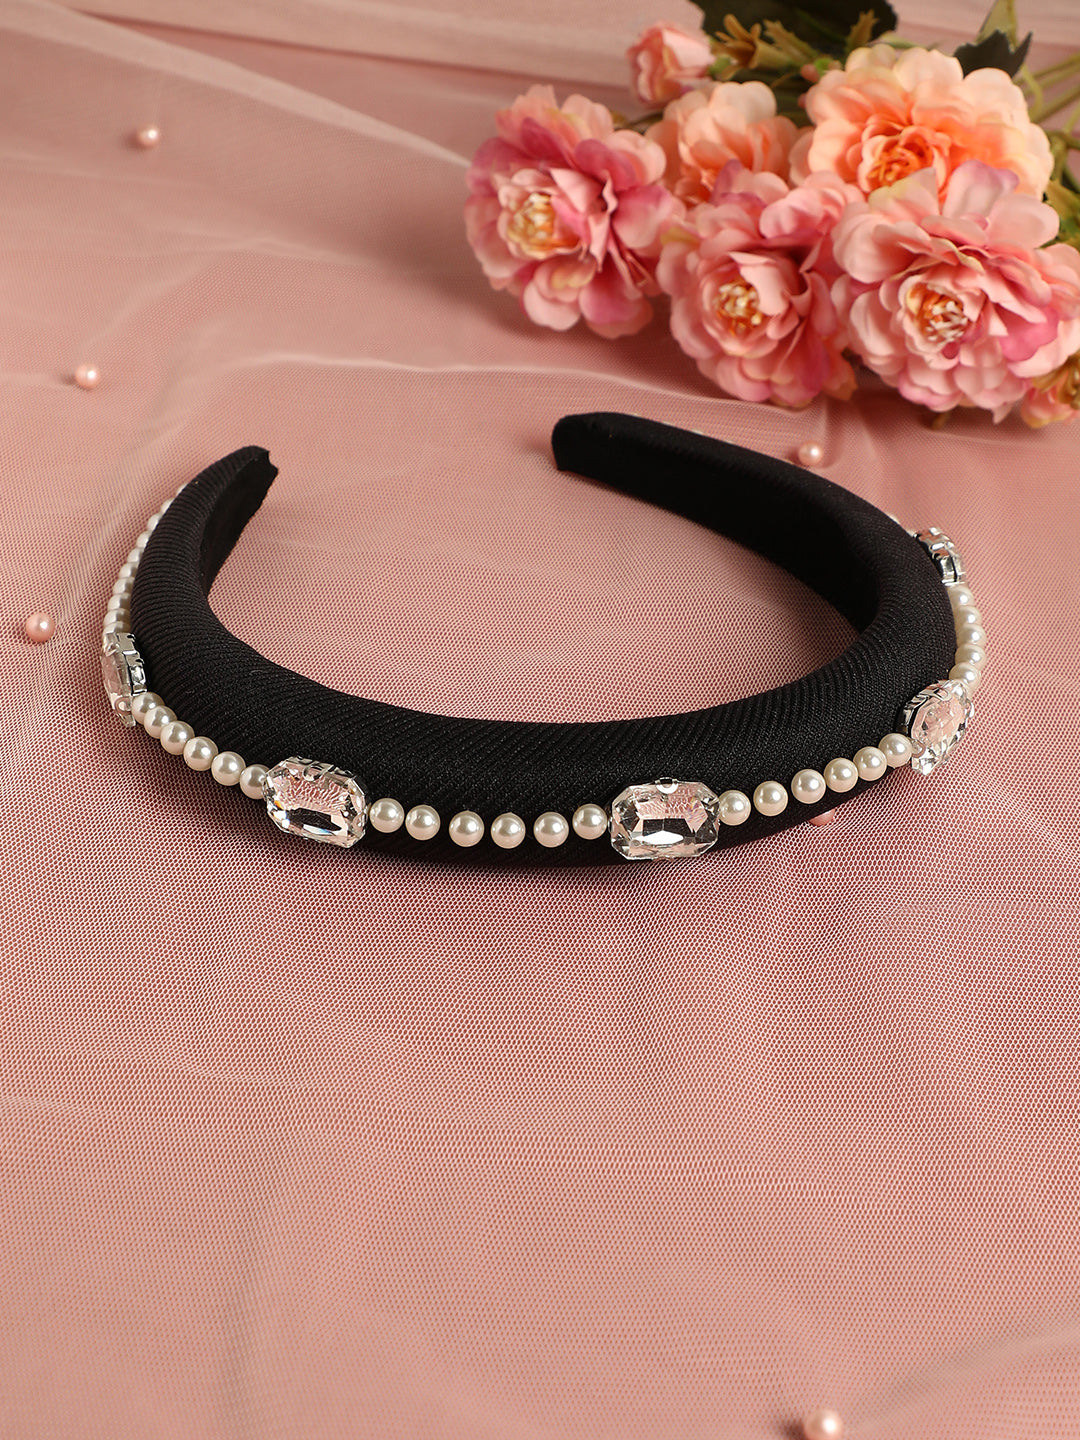 Black Color Hairband